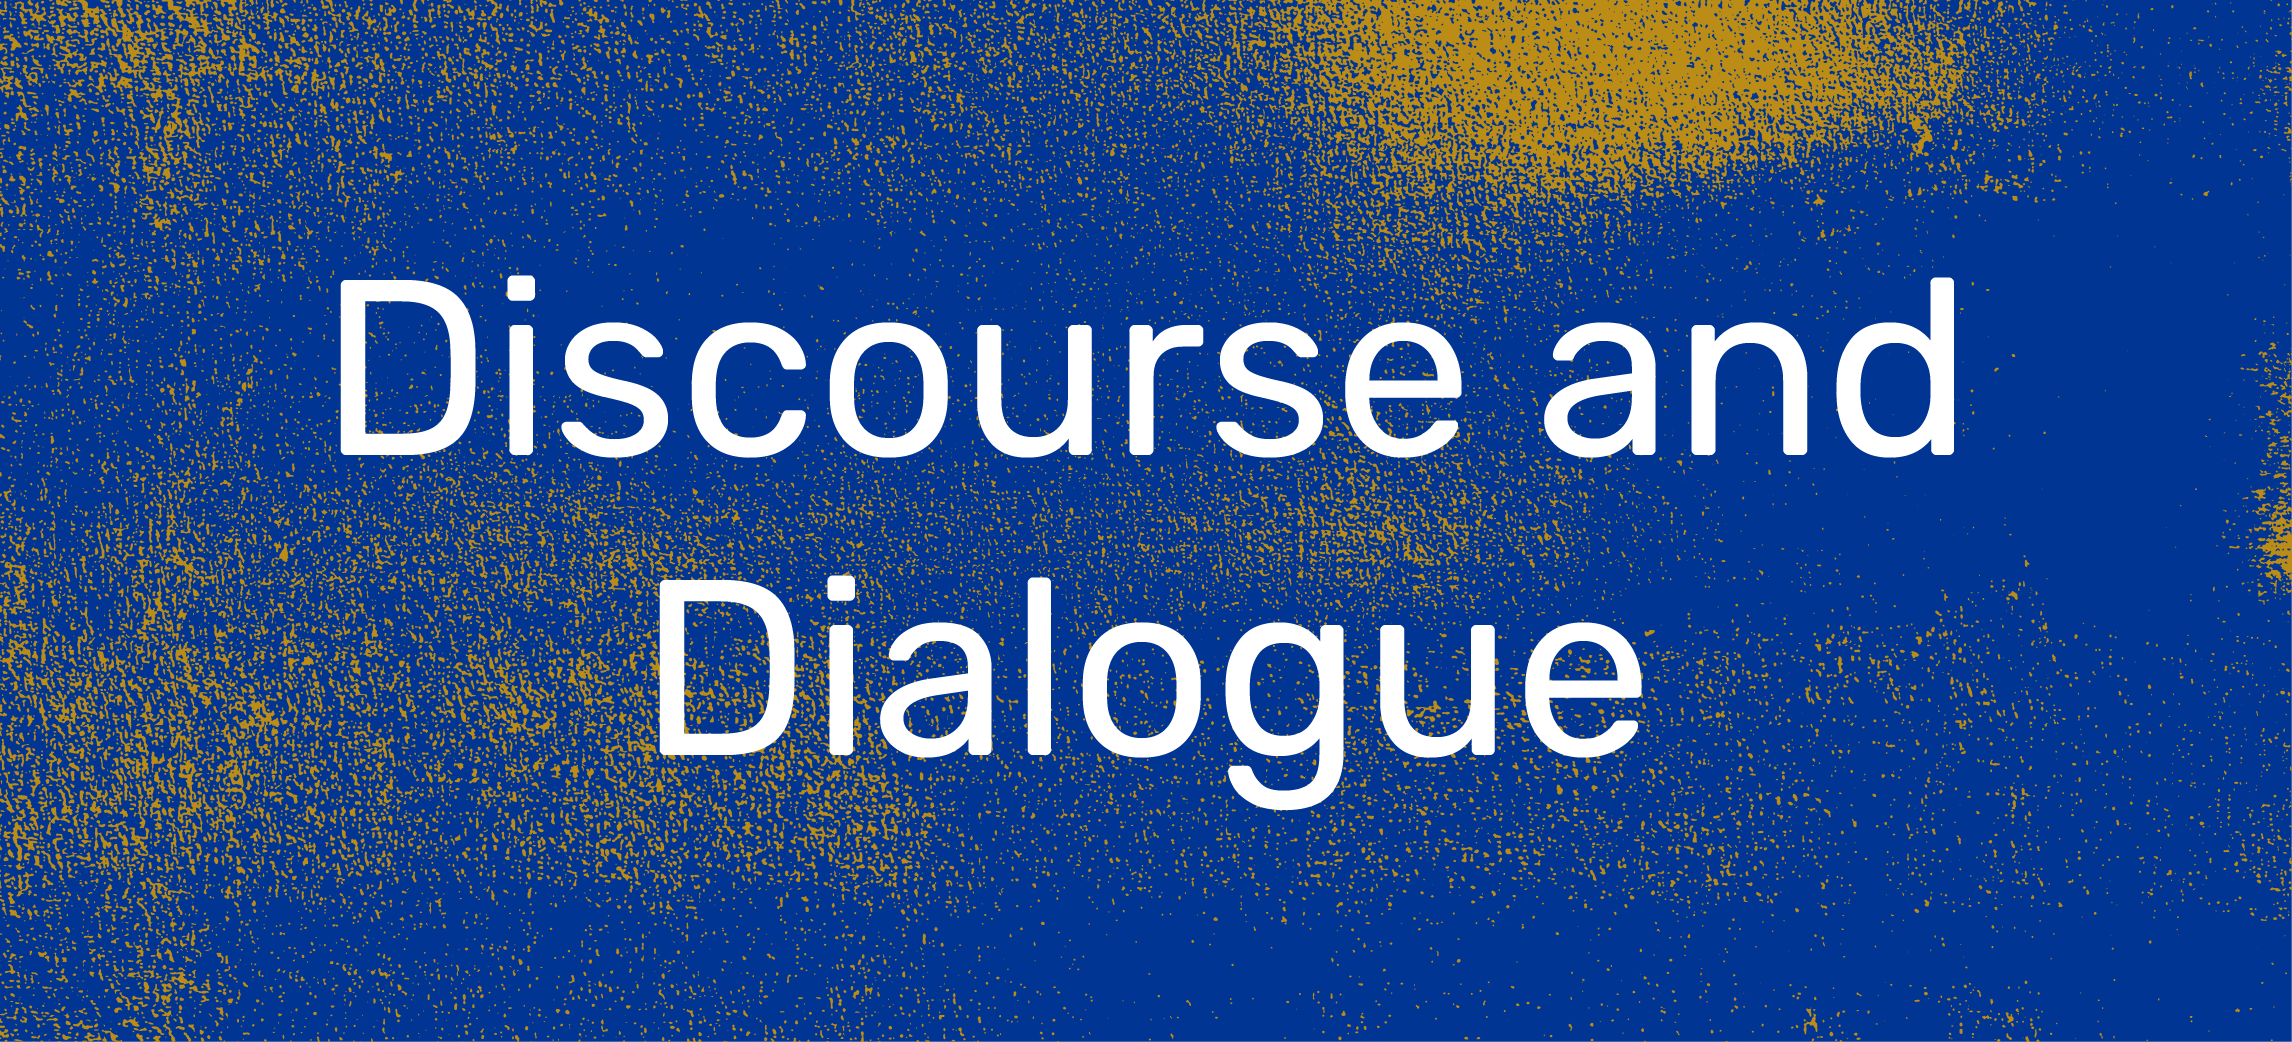 Link to Discourse and Dialogue courses (button image)